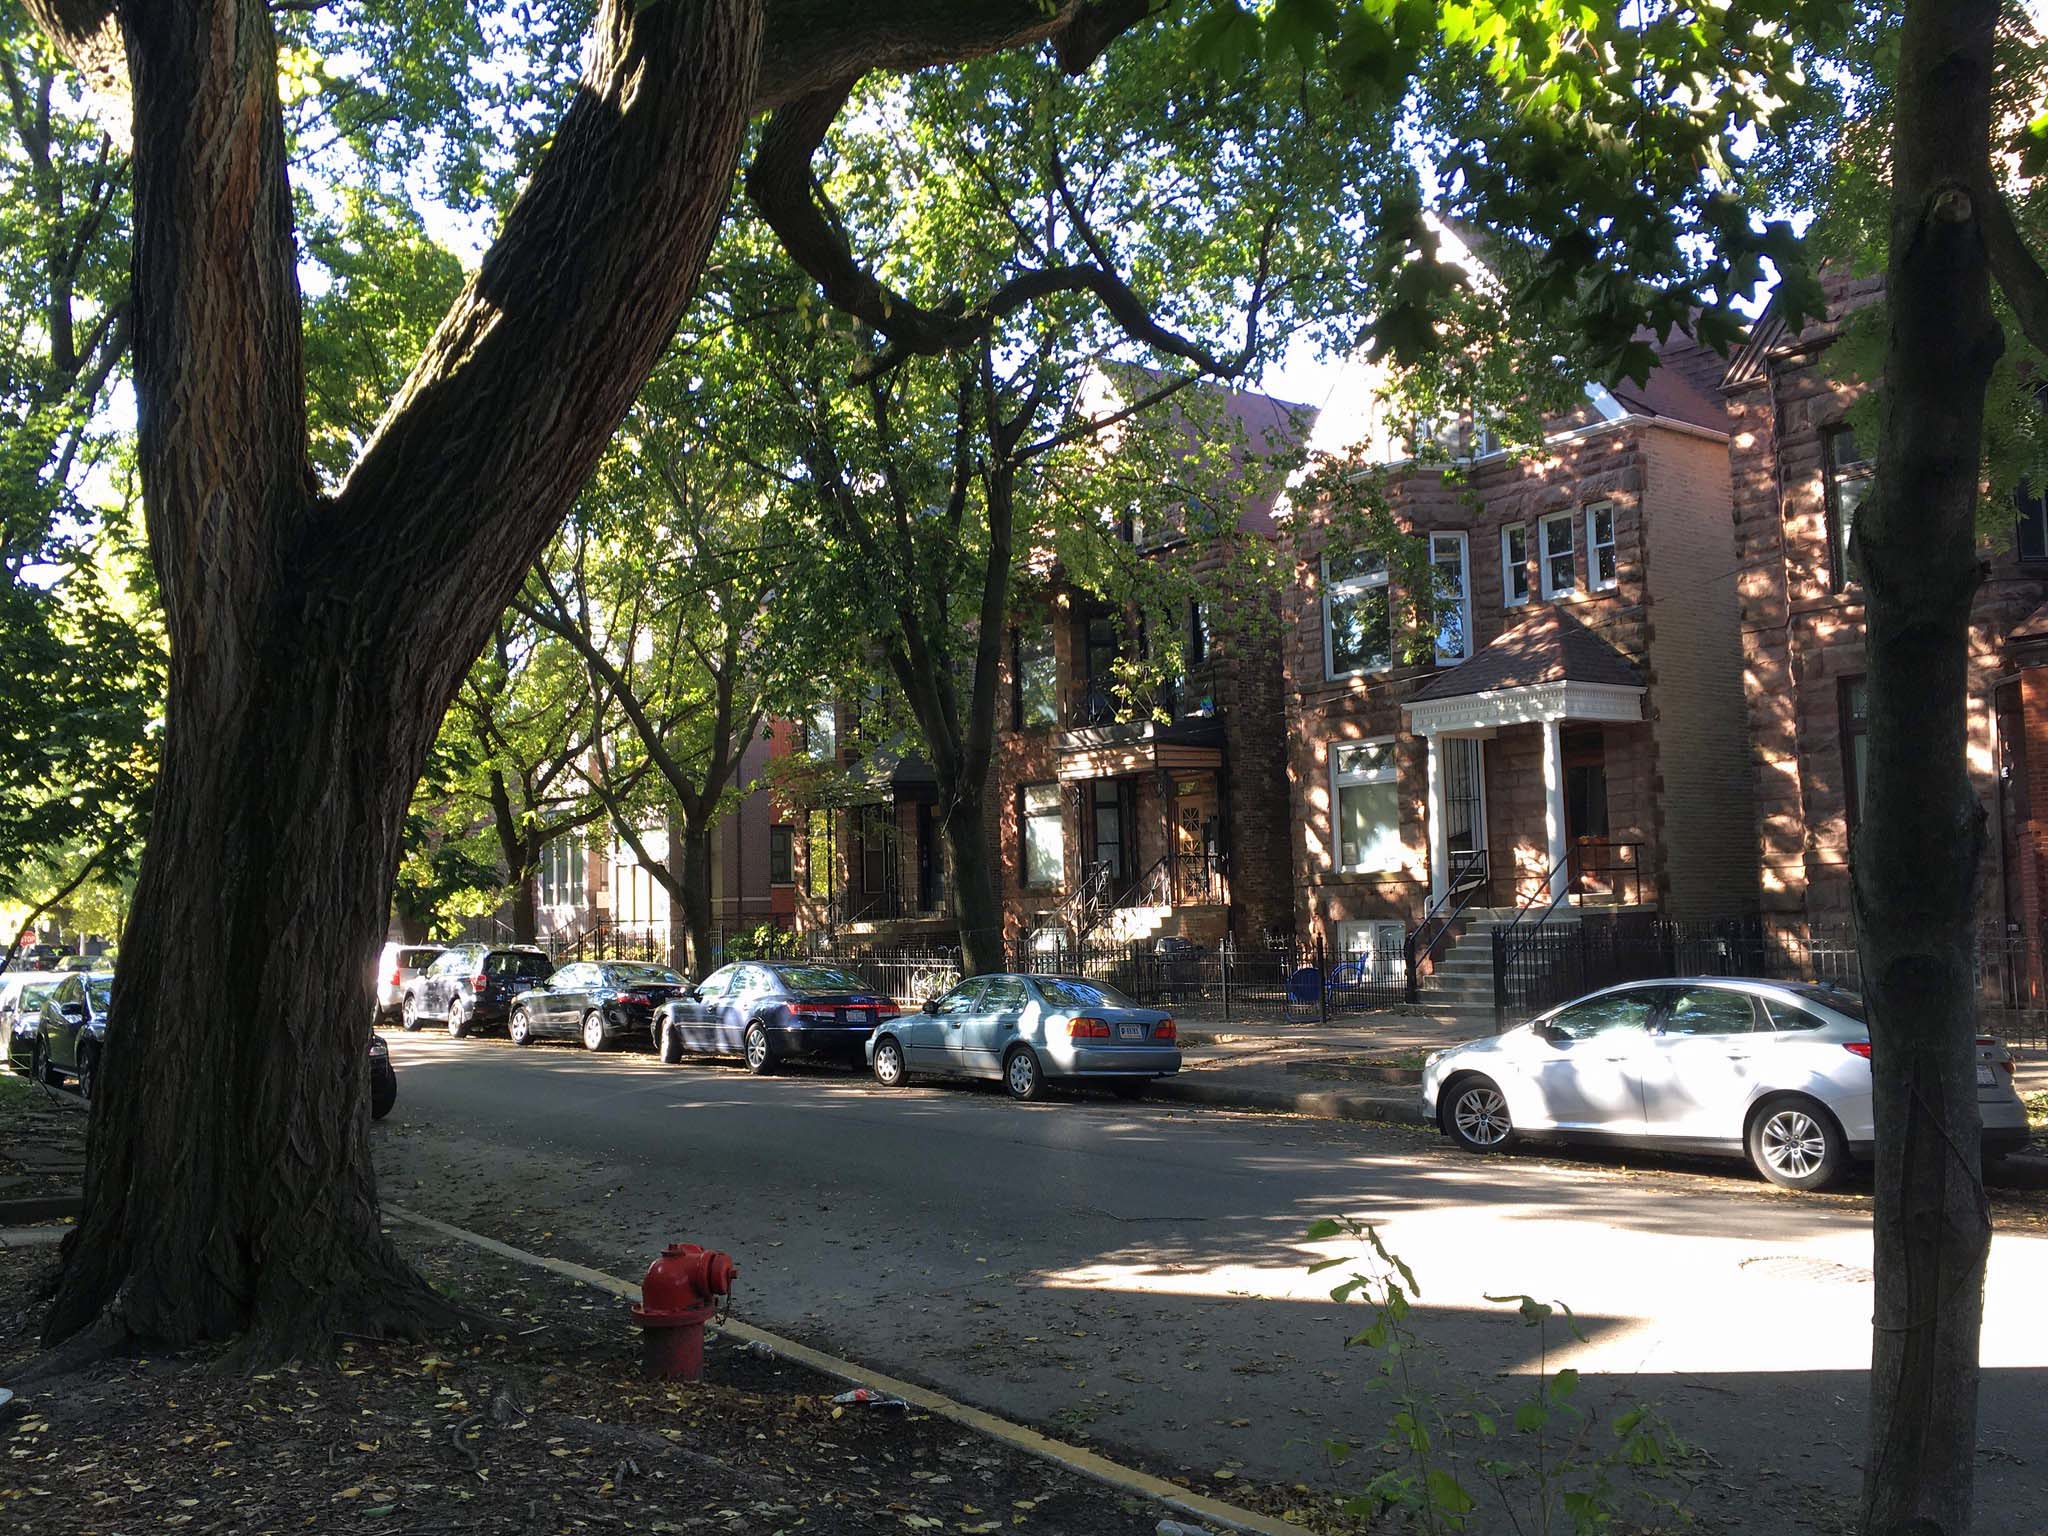 A streetscape of row houses shaded by trees